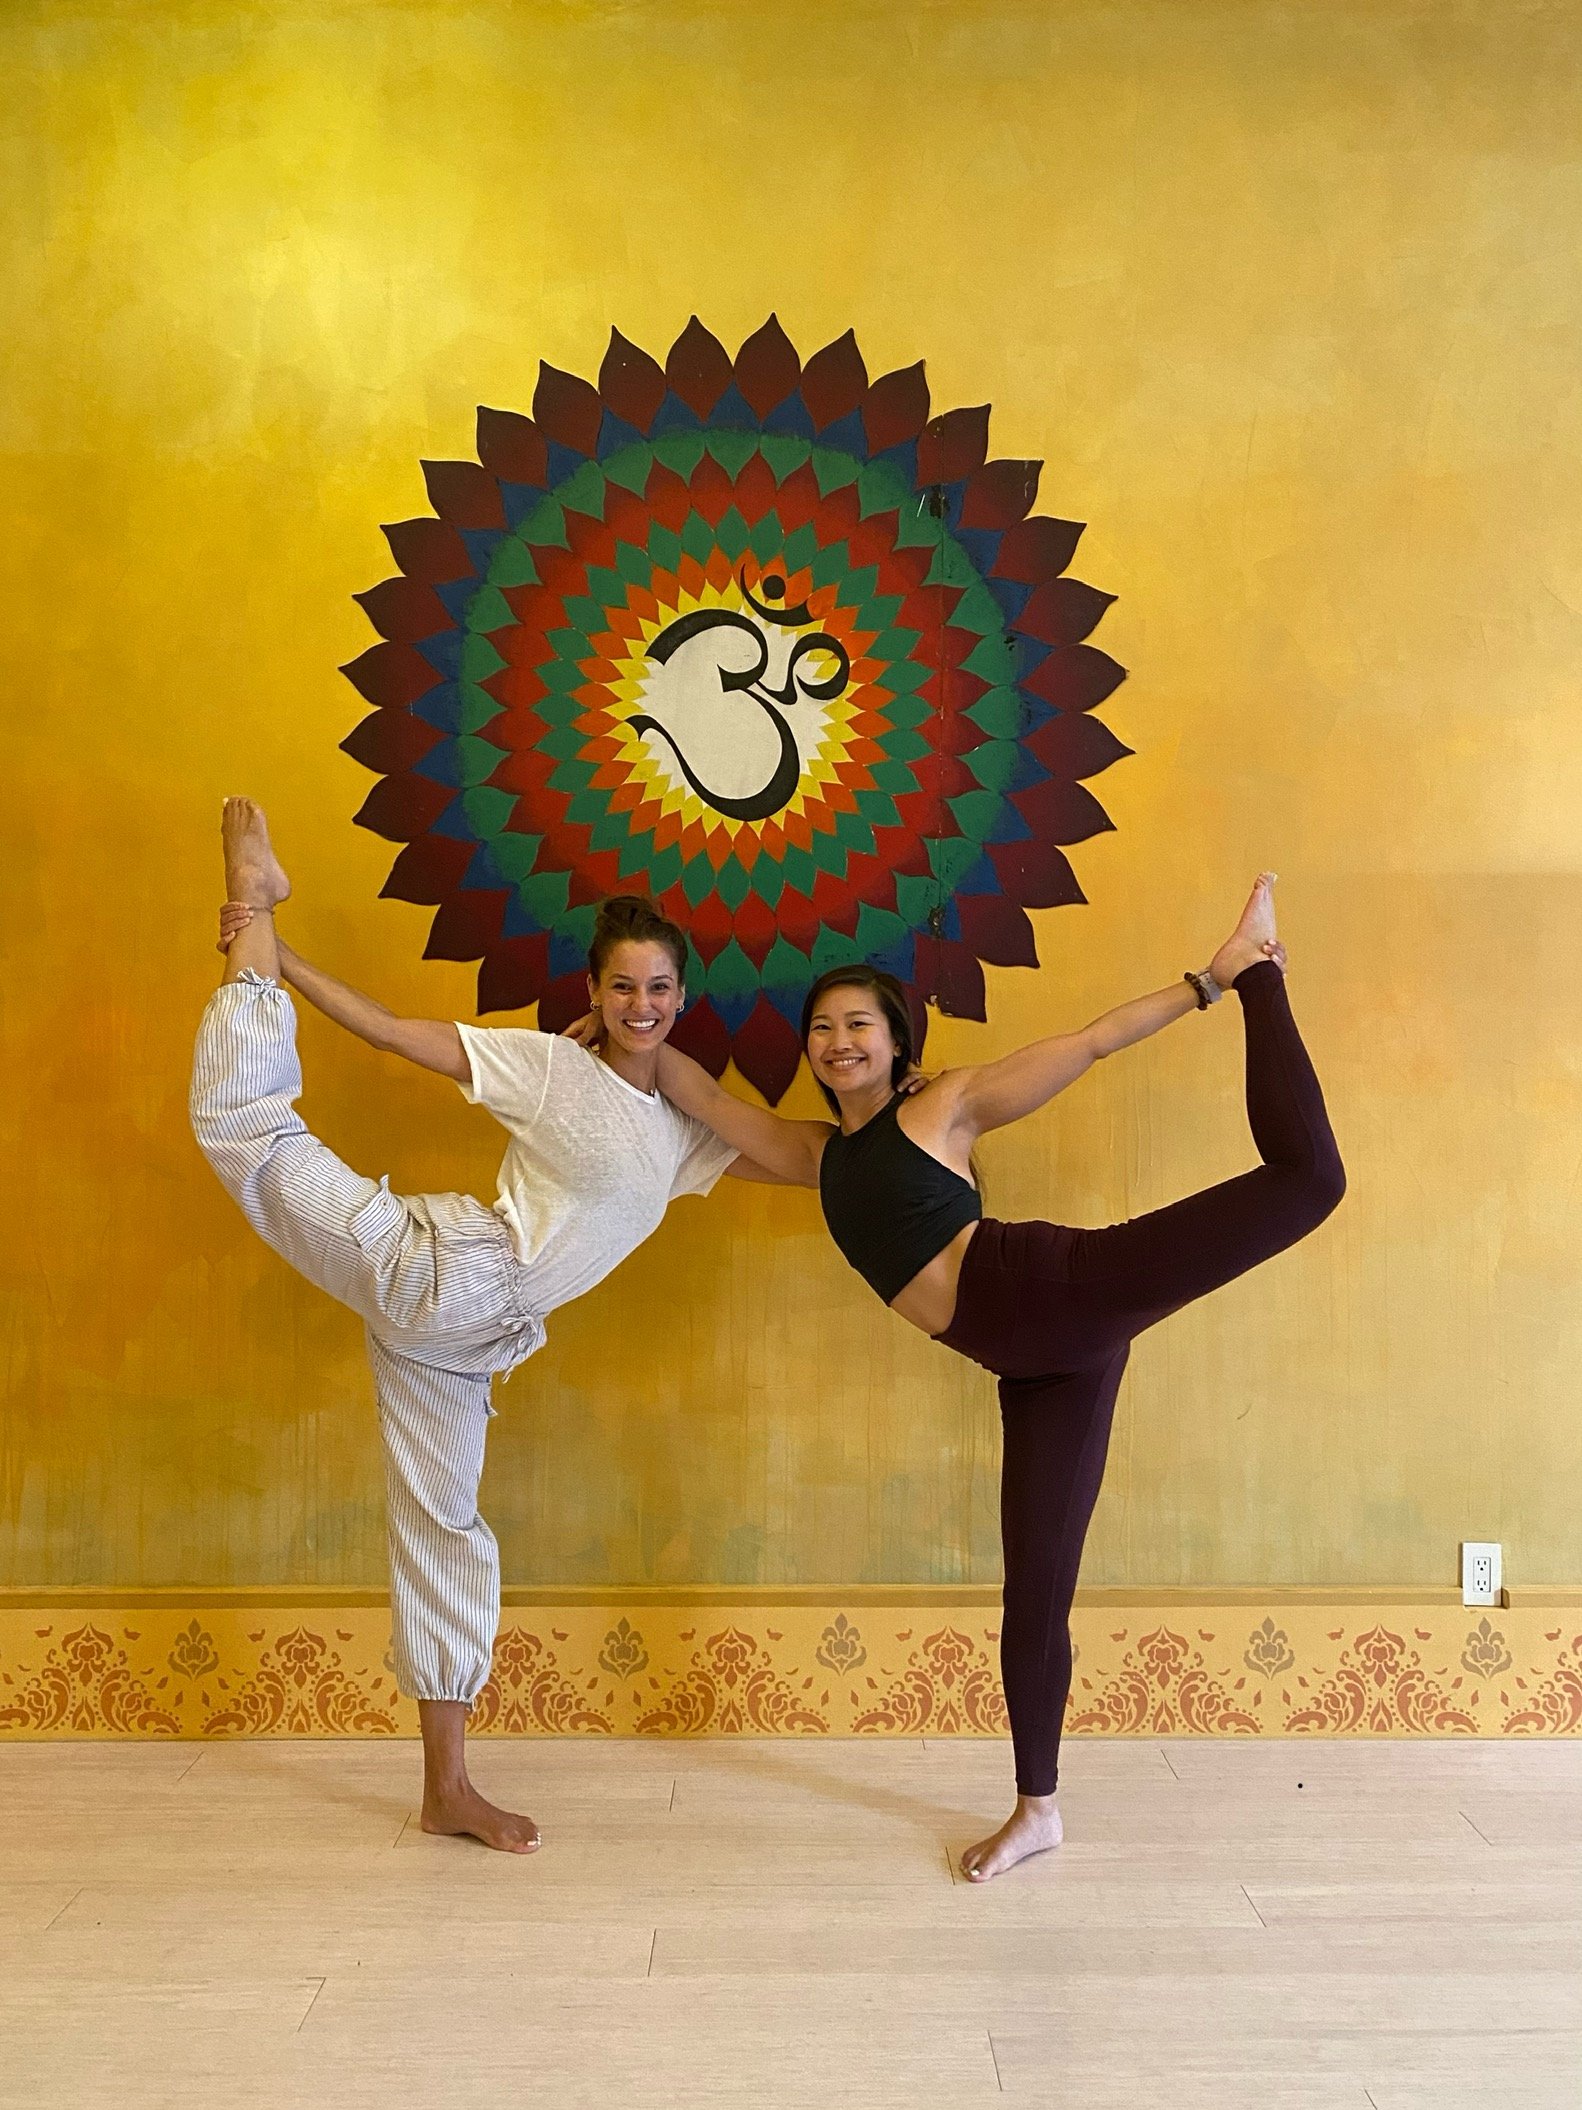 Victoria Davis and Jessica Hwang practicing standing bow yoga pose, with focused balance and grace, in front of a vibrant mural depicting the Om symbol.